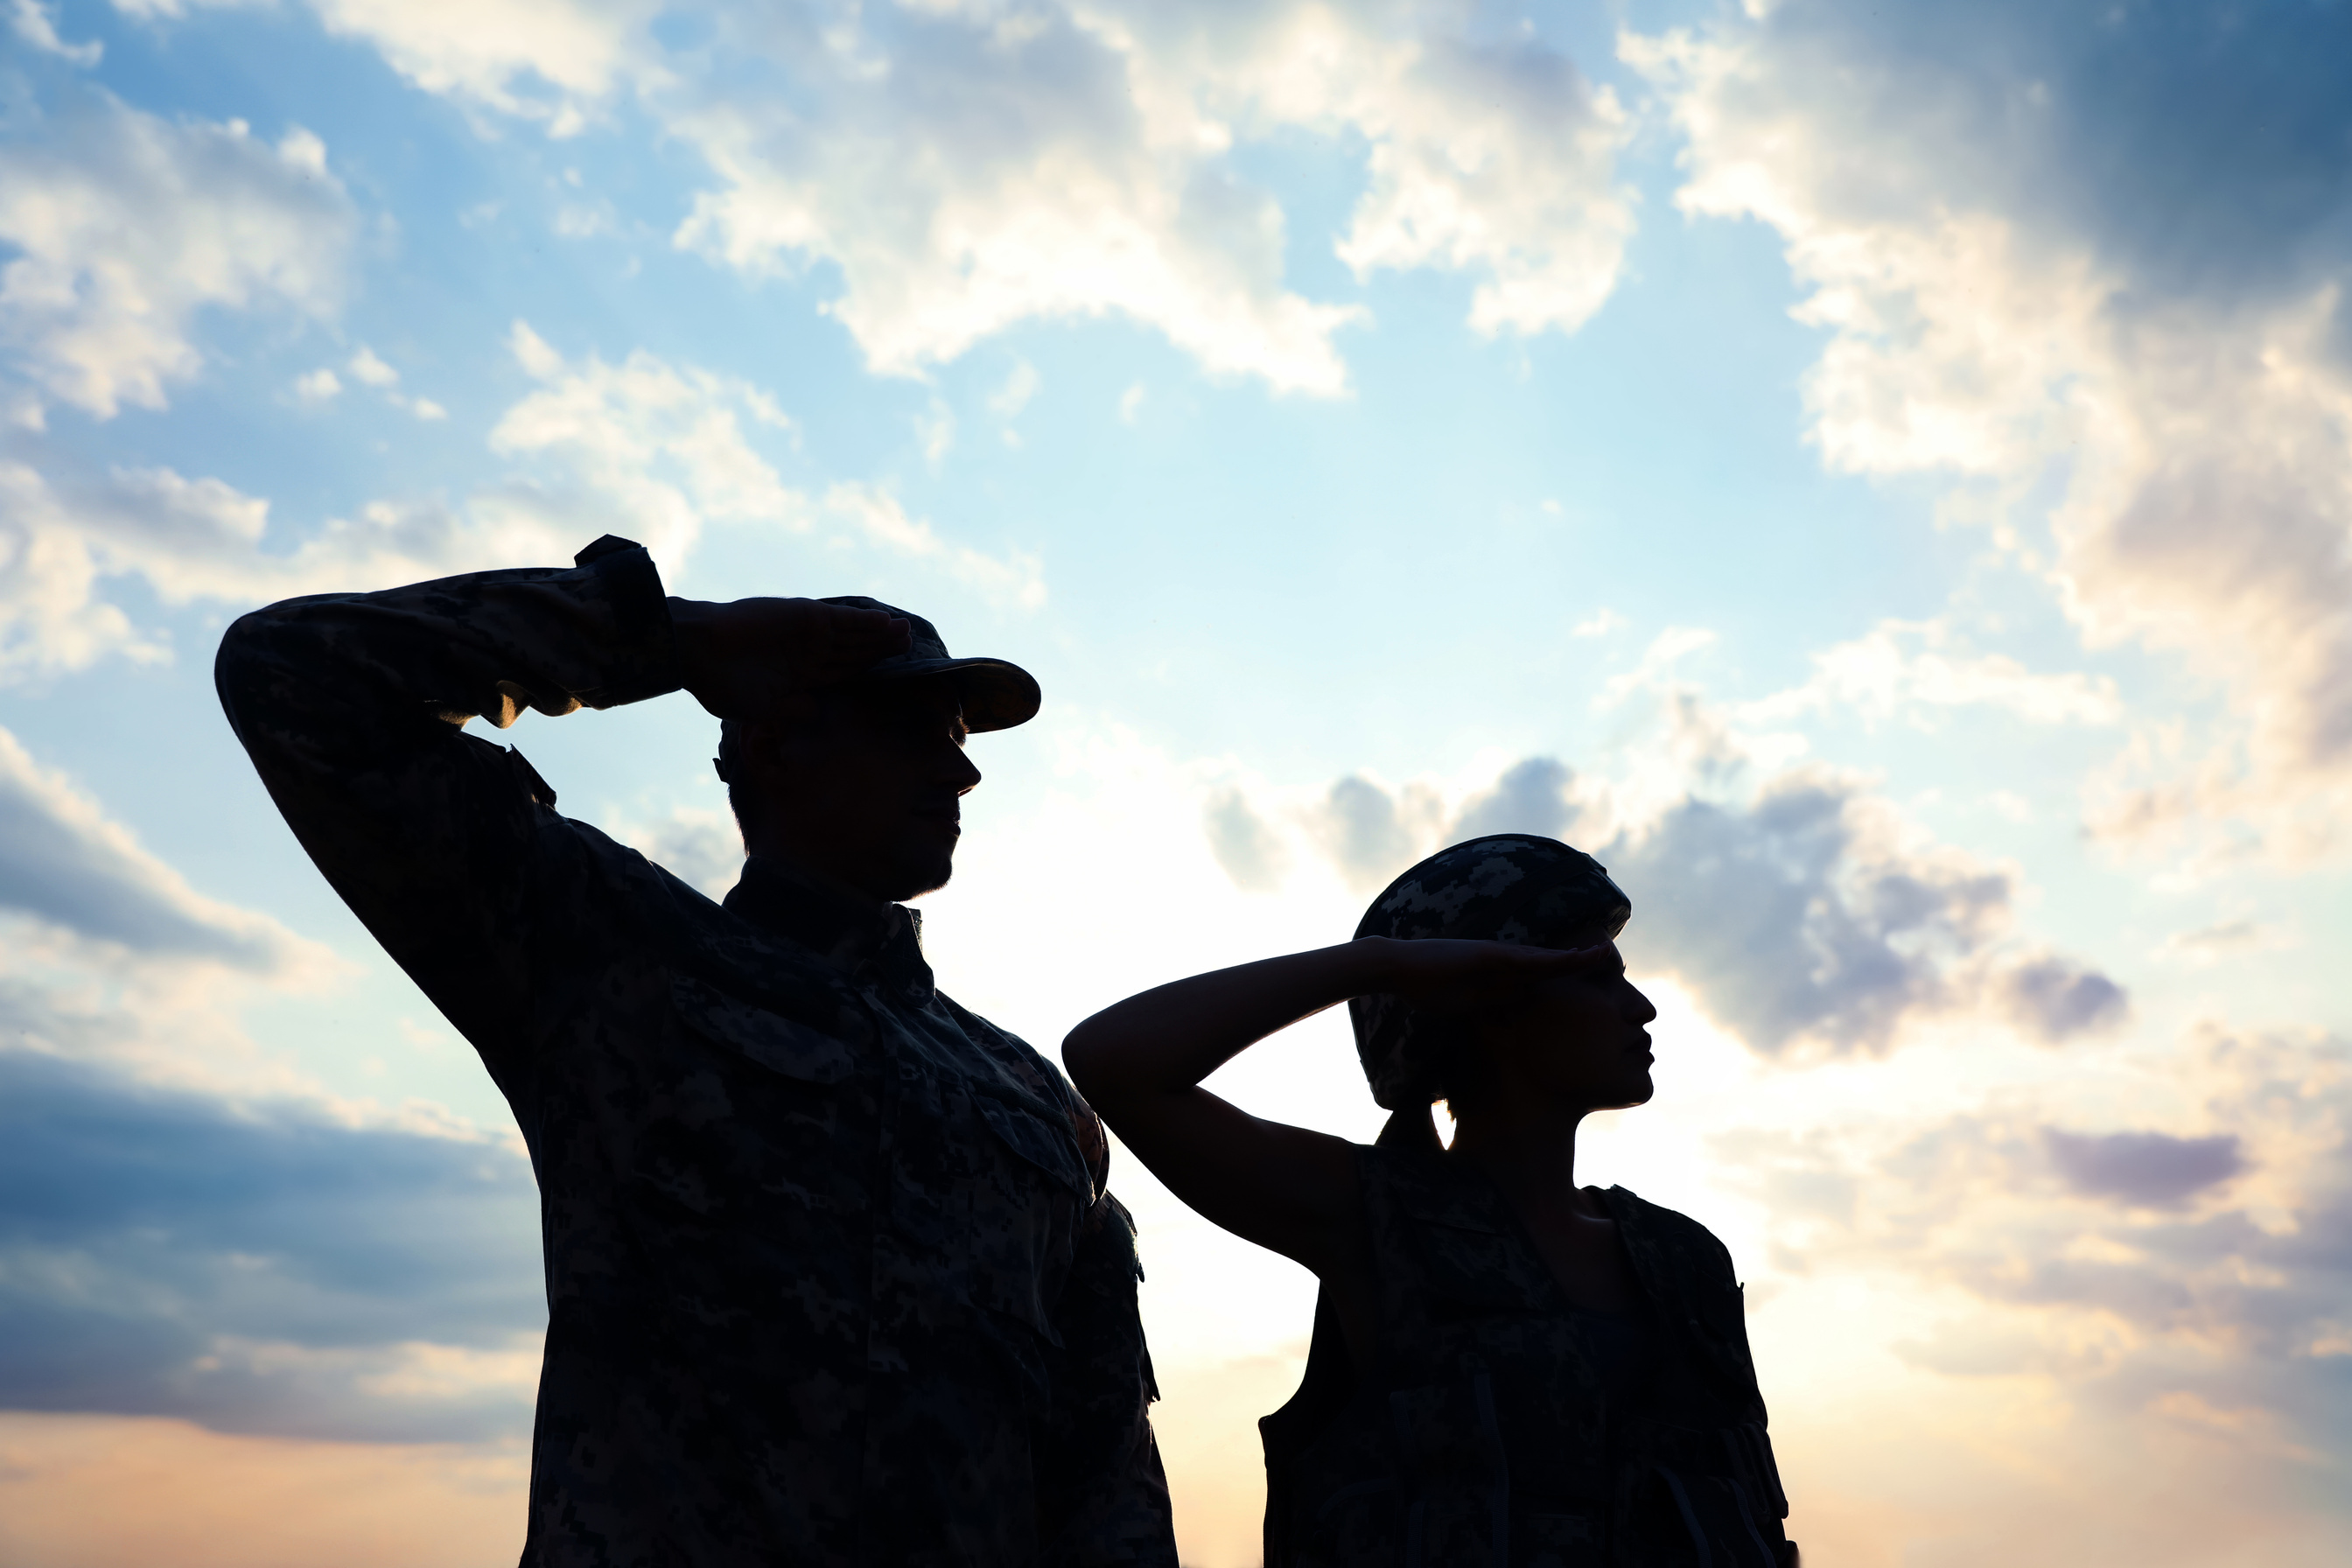 Soldiers in Uniform Saluting Outdoors. Military Service